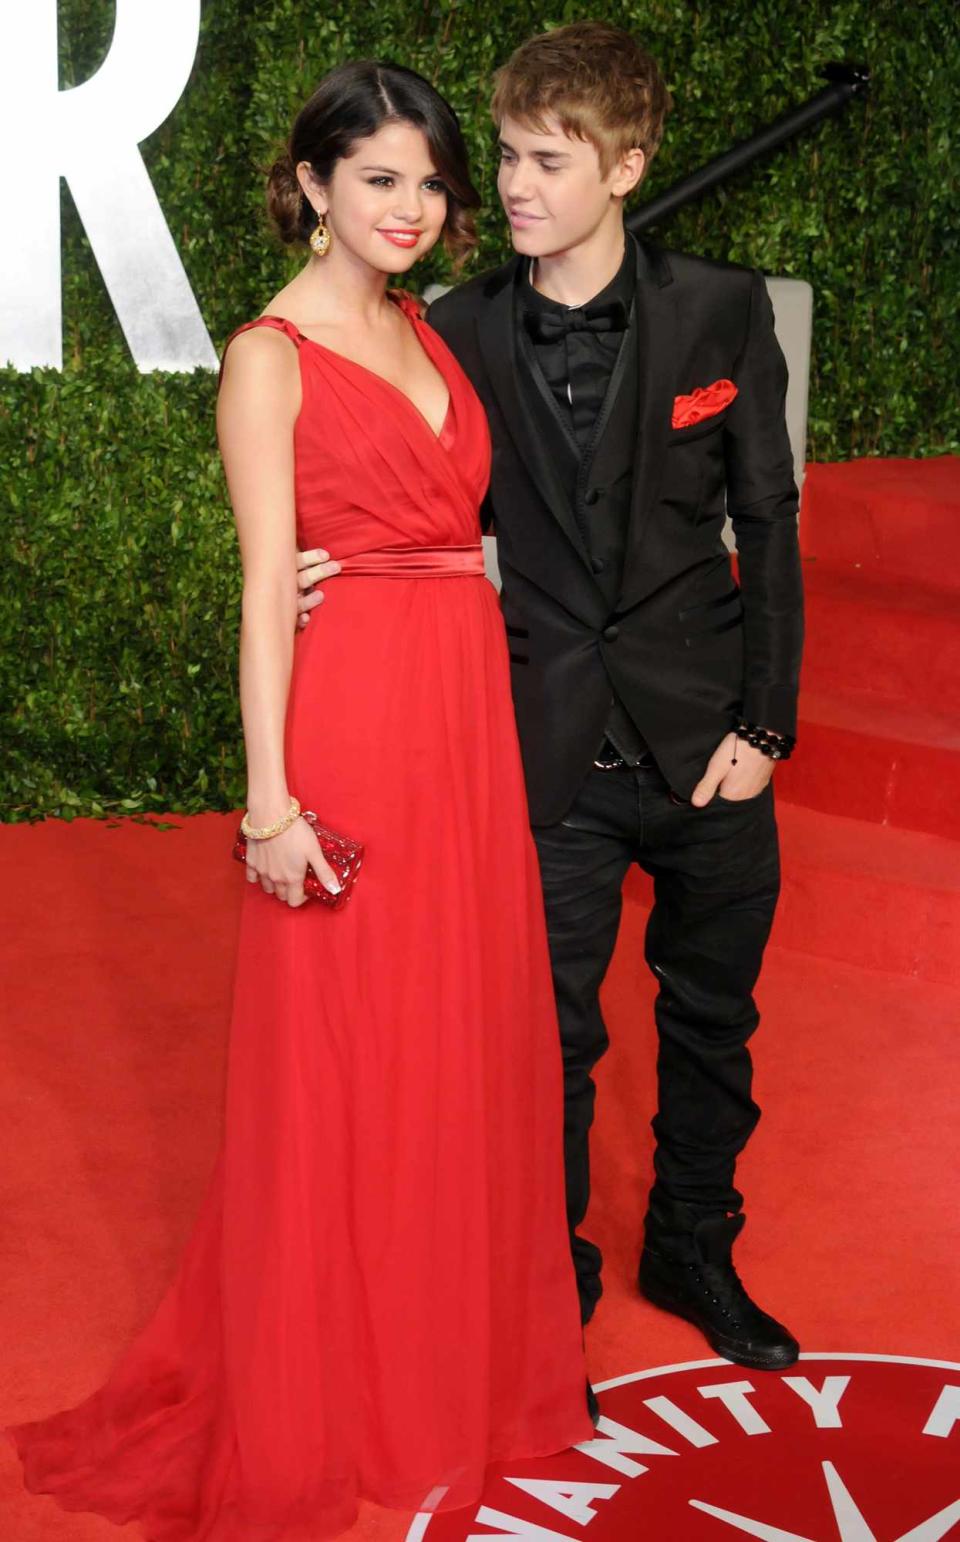 Selena Gomez and Justin Bieber arrive at the Vanity Fair Oscar Party 2011, February 27, 2010 at the Sunset Tower Hotel in West Hollywood, California